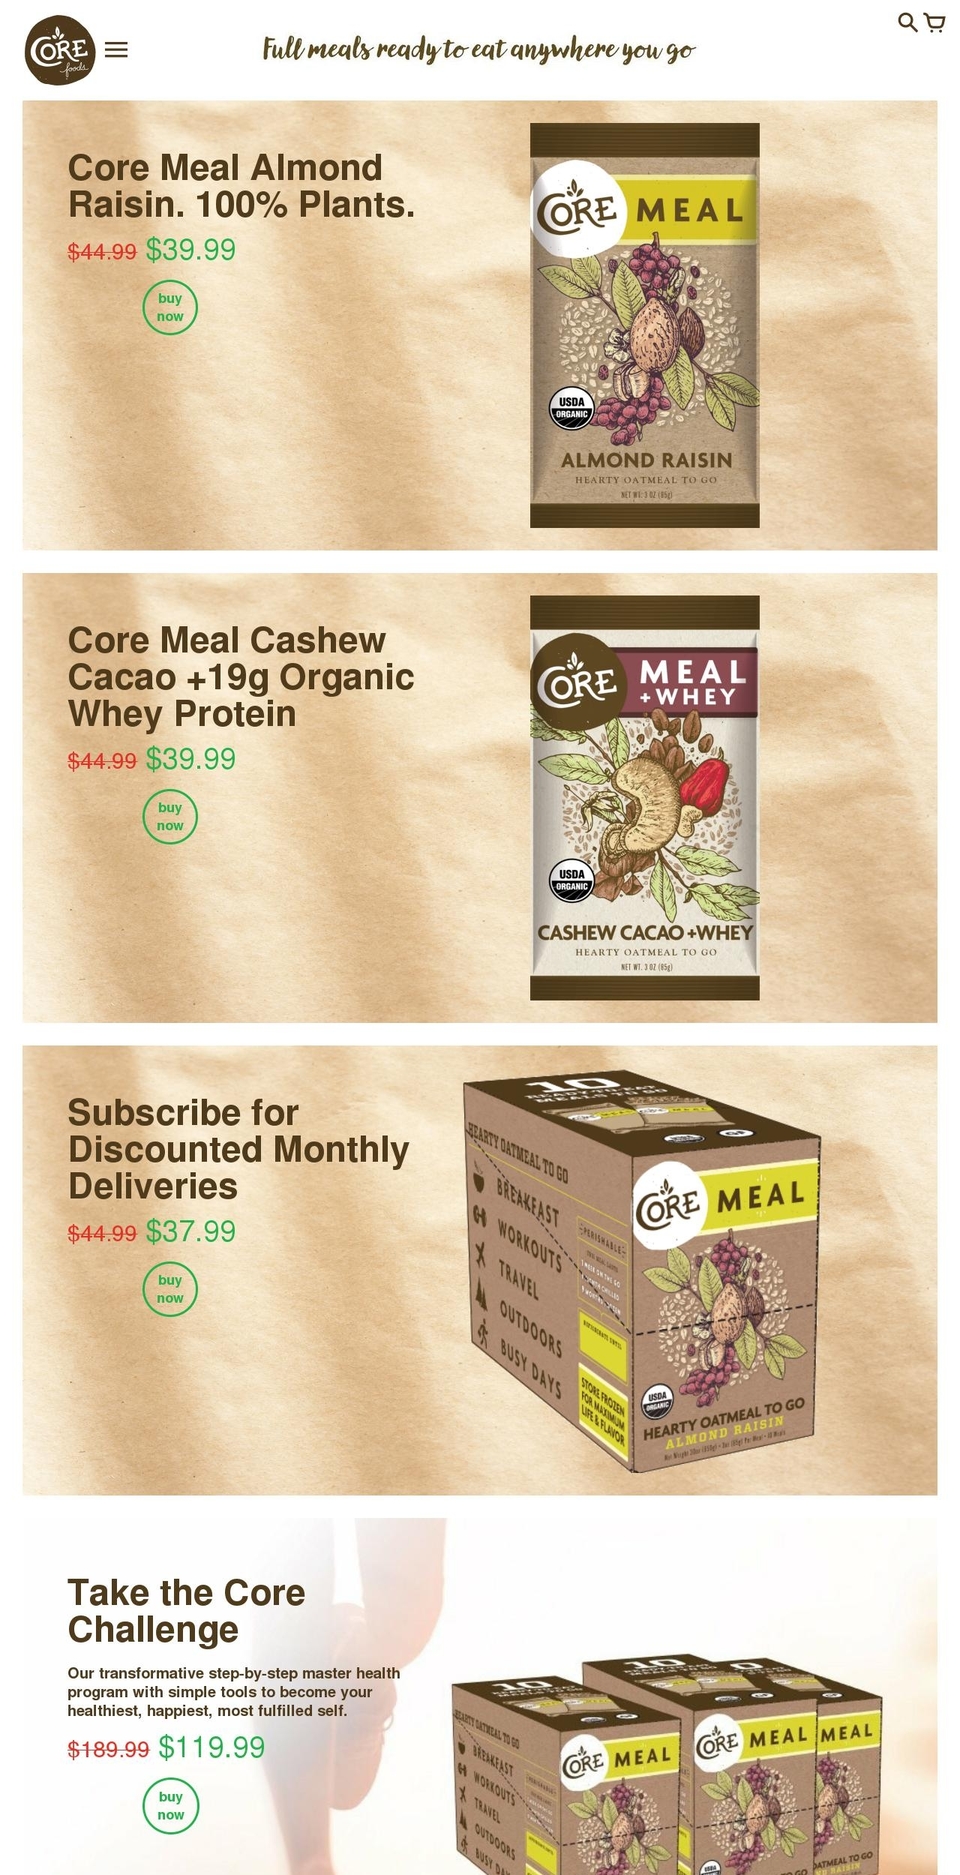 Colors Shopify theme site example corefoods.org